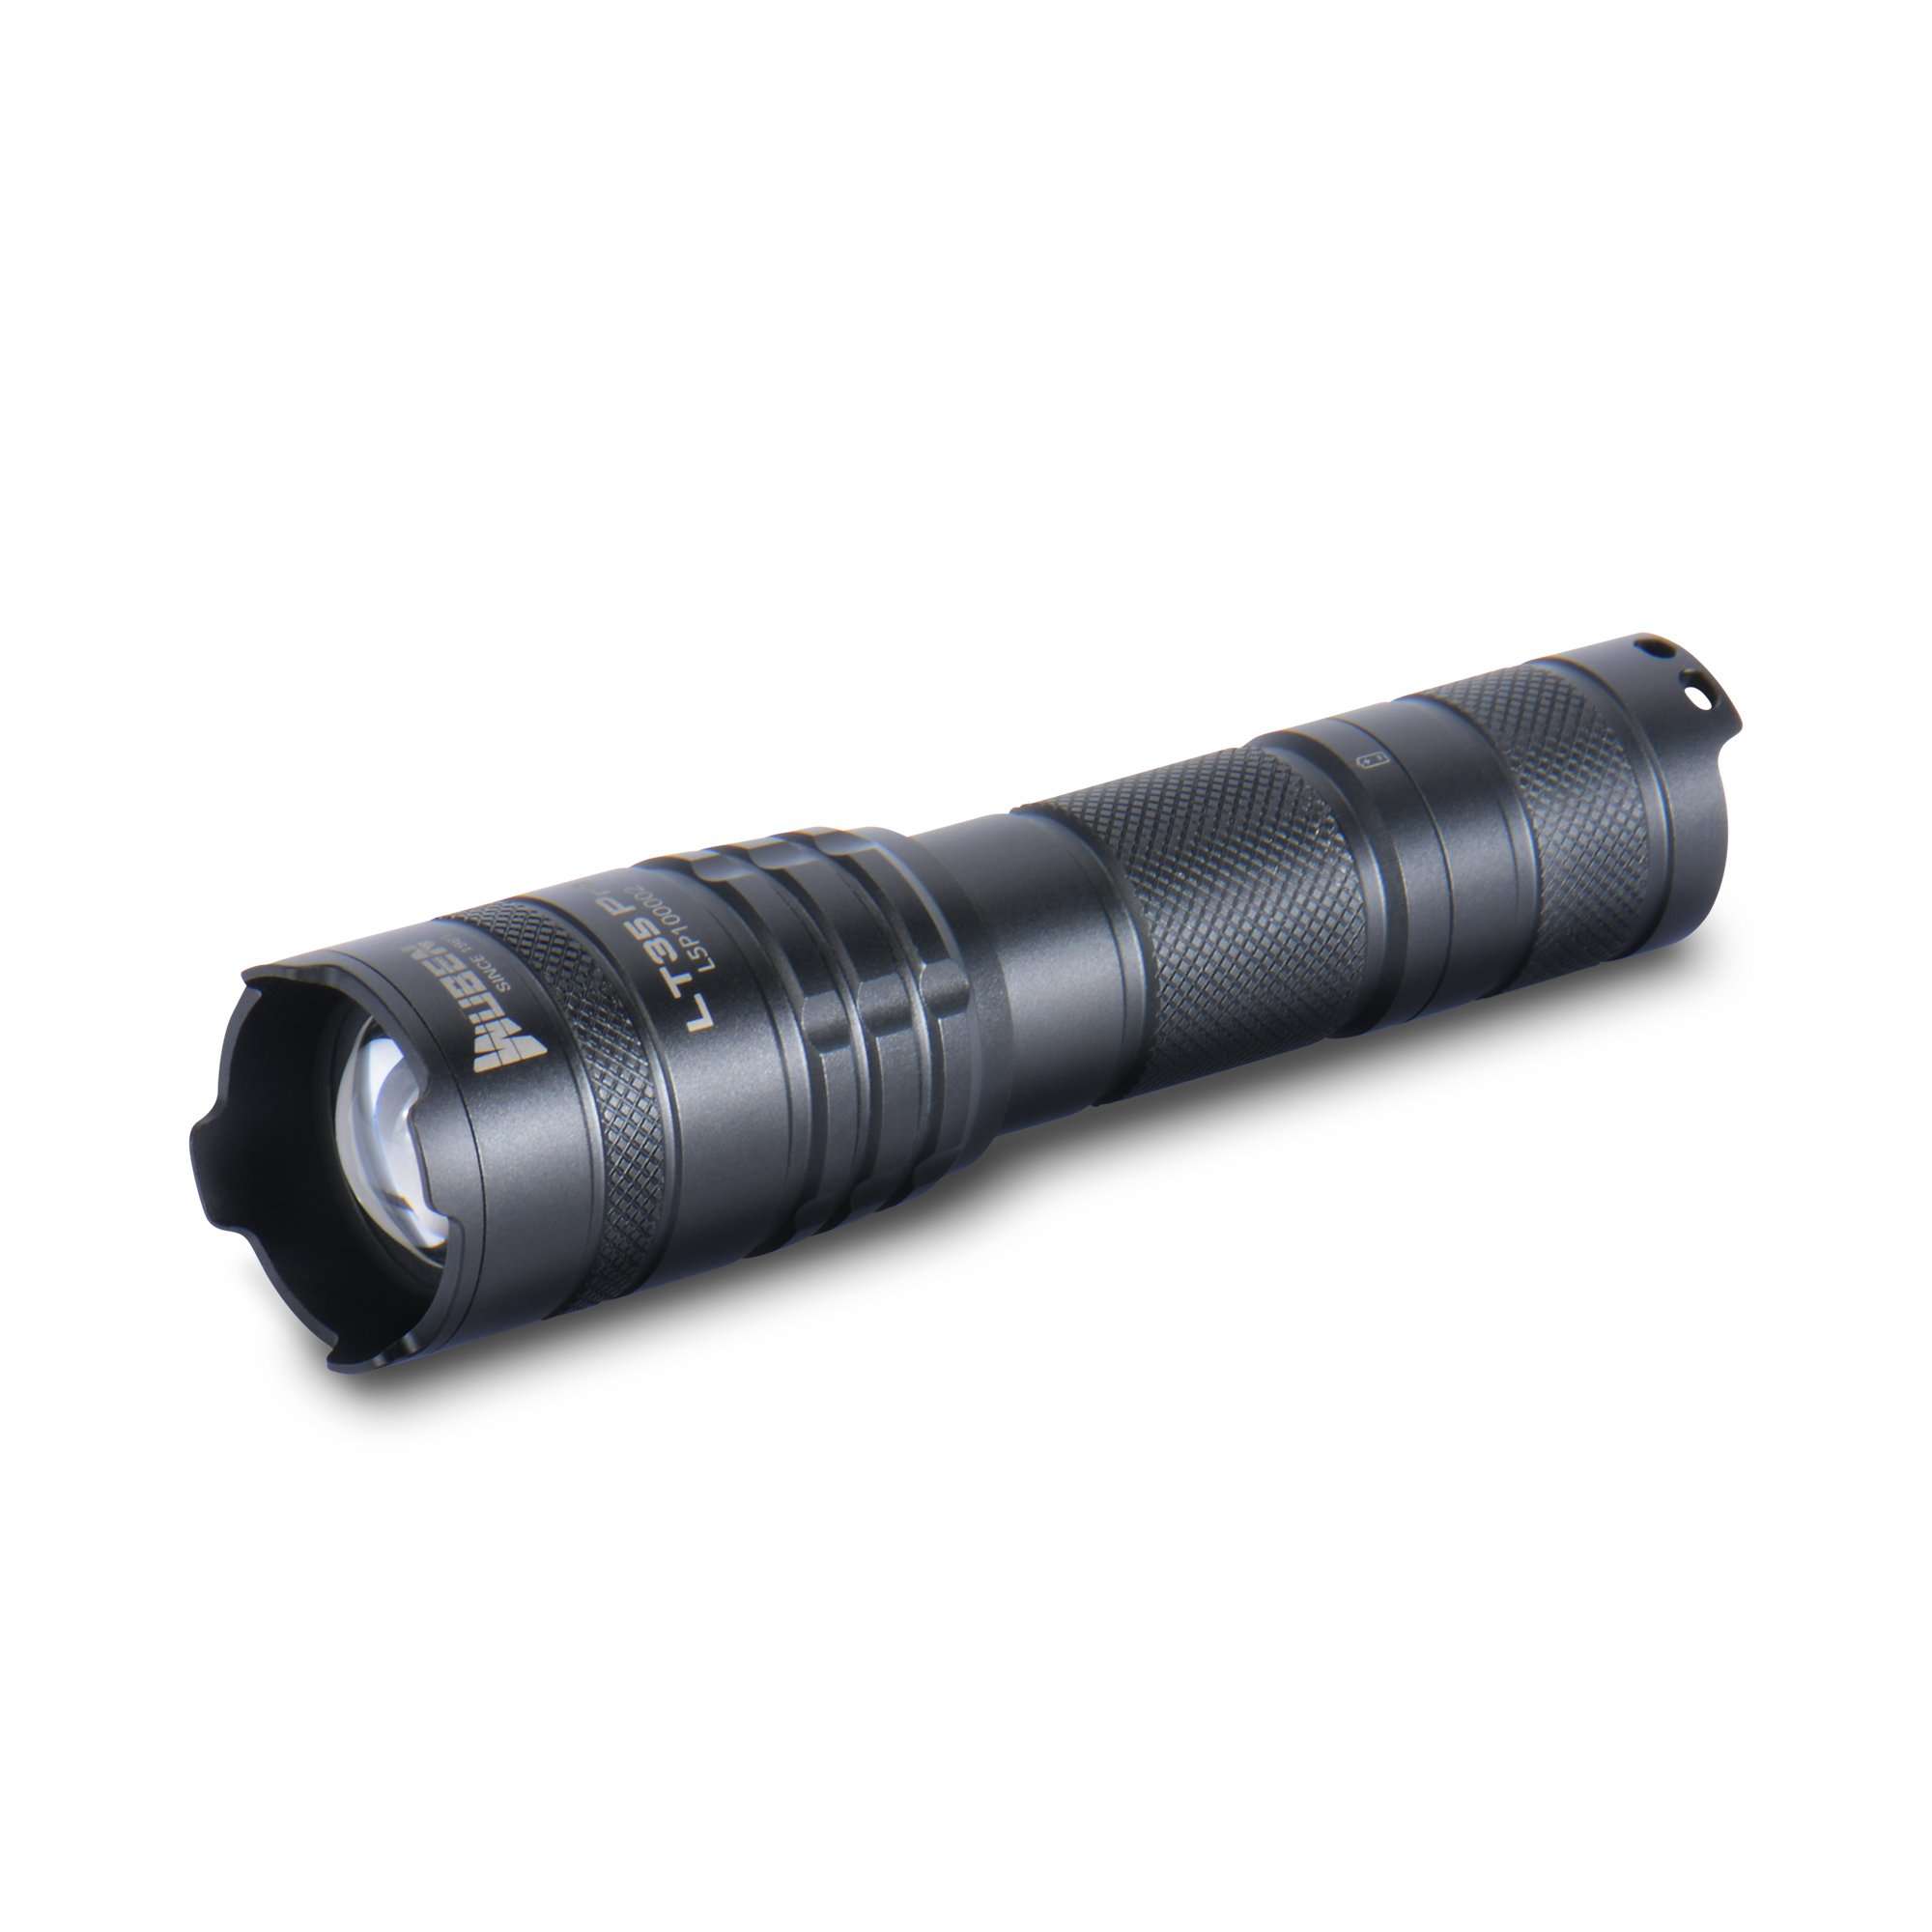 Wuben LT35 Pro 1200 Lumens Zoomable and Rechargeable Flashlight